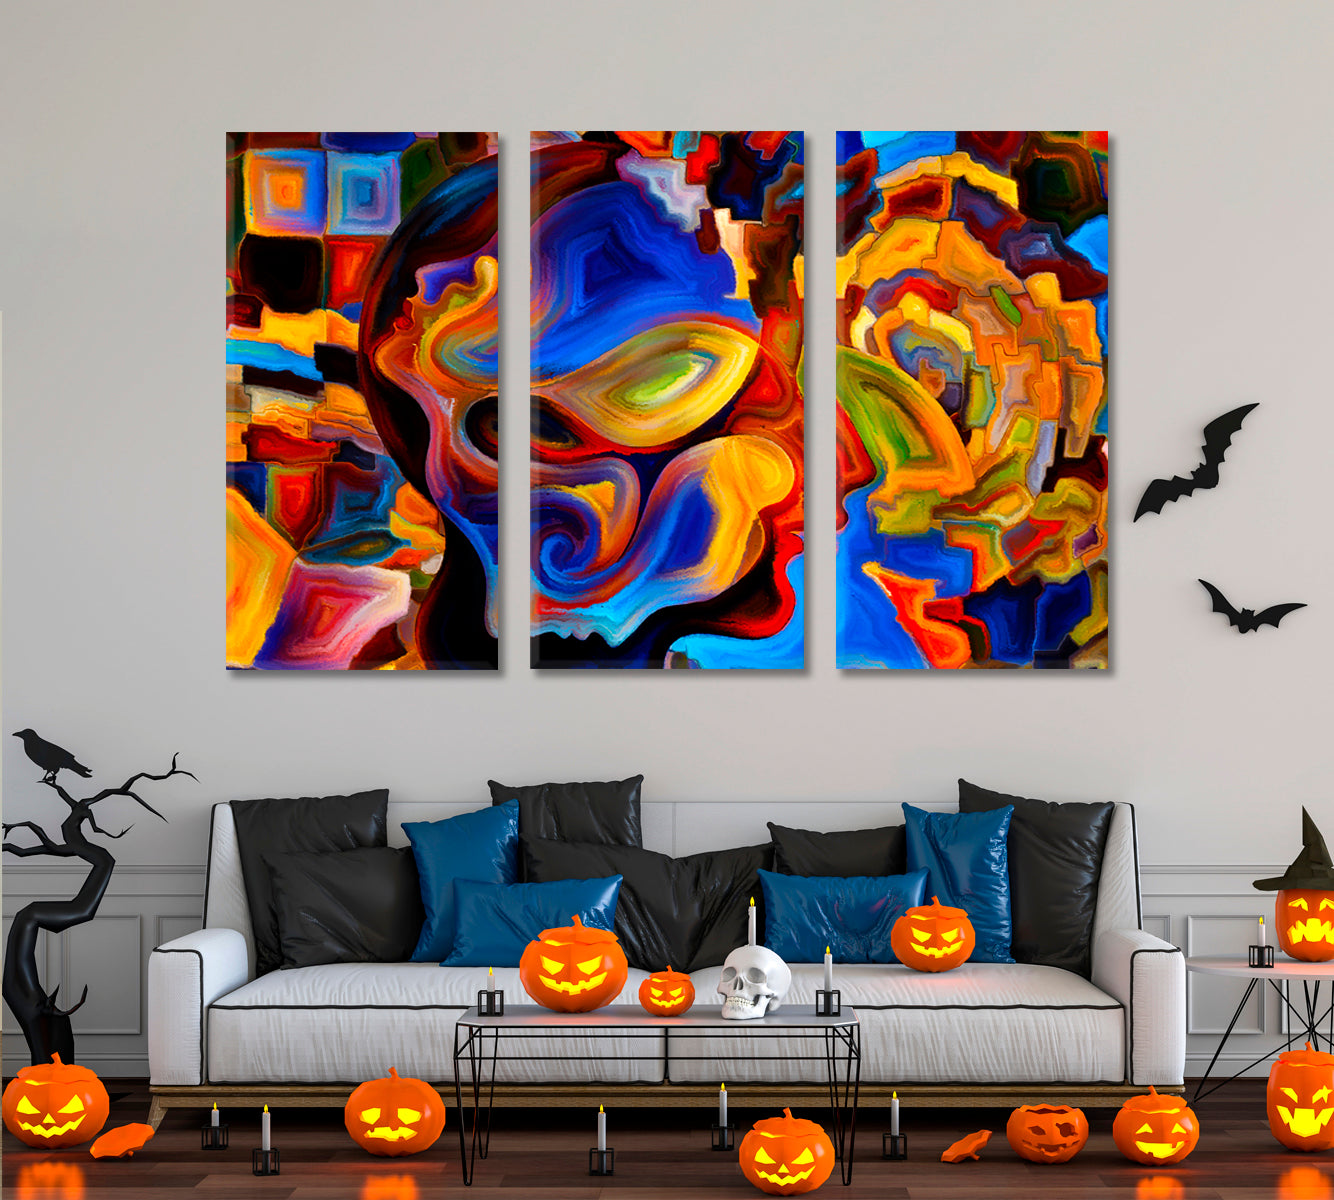 Human Face And Colorful Abstract Shapes Consciousness Art Artesty 3 panels 36" x 24" 